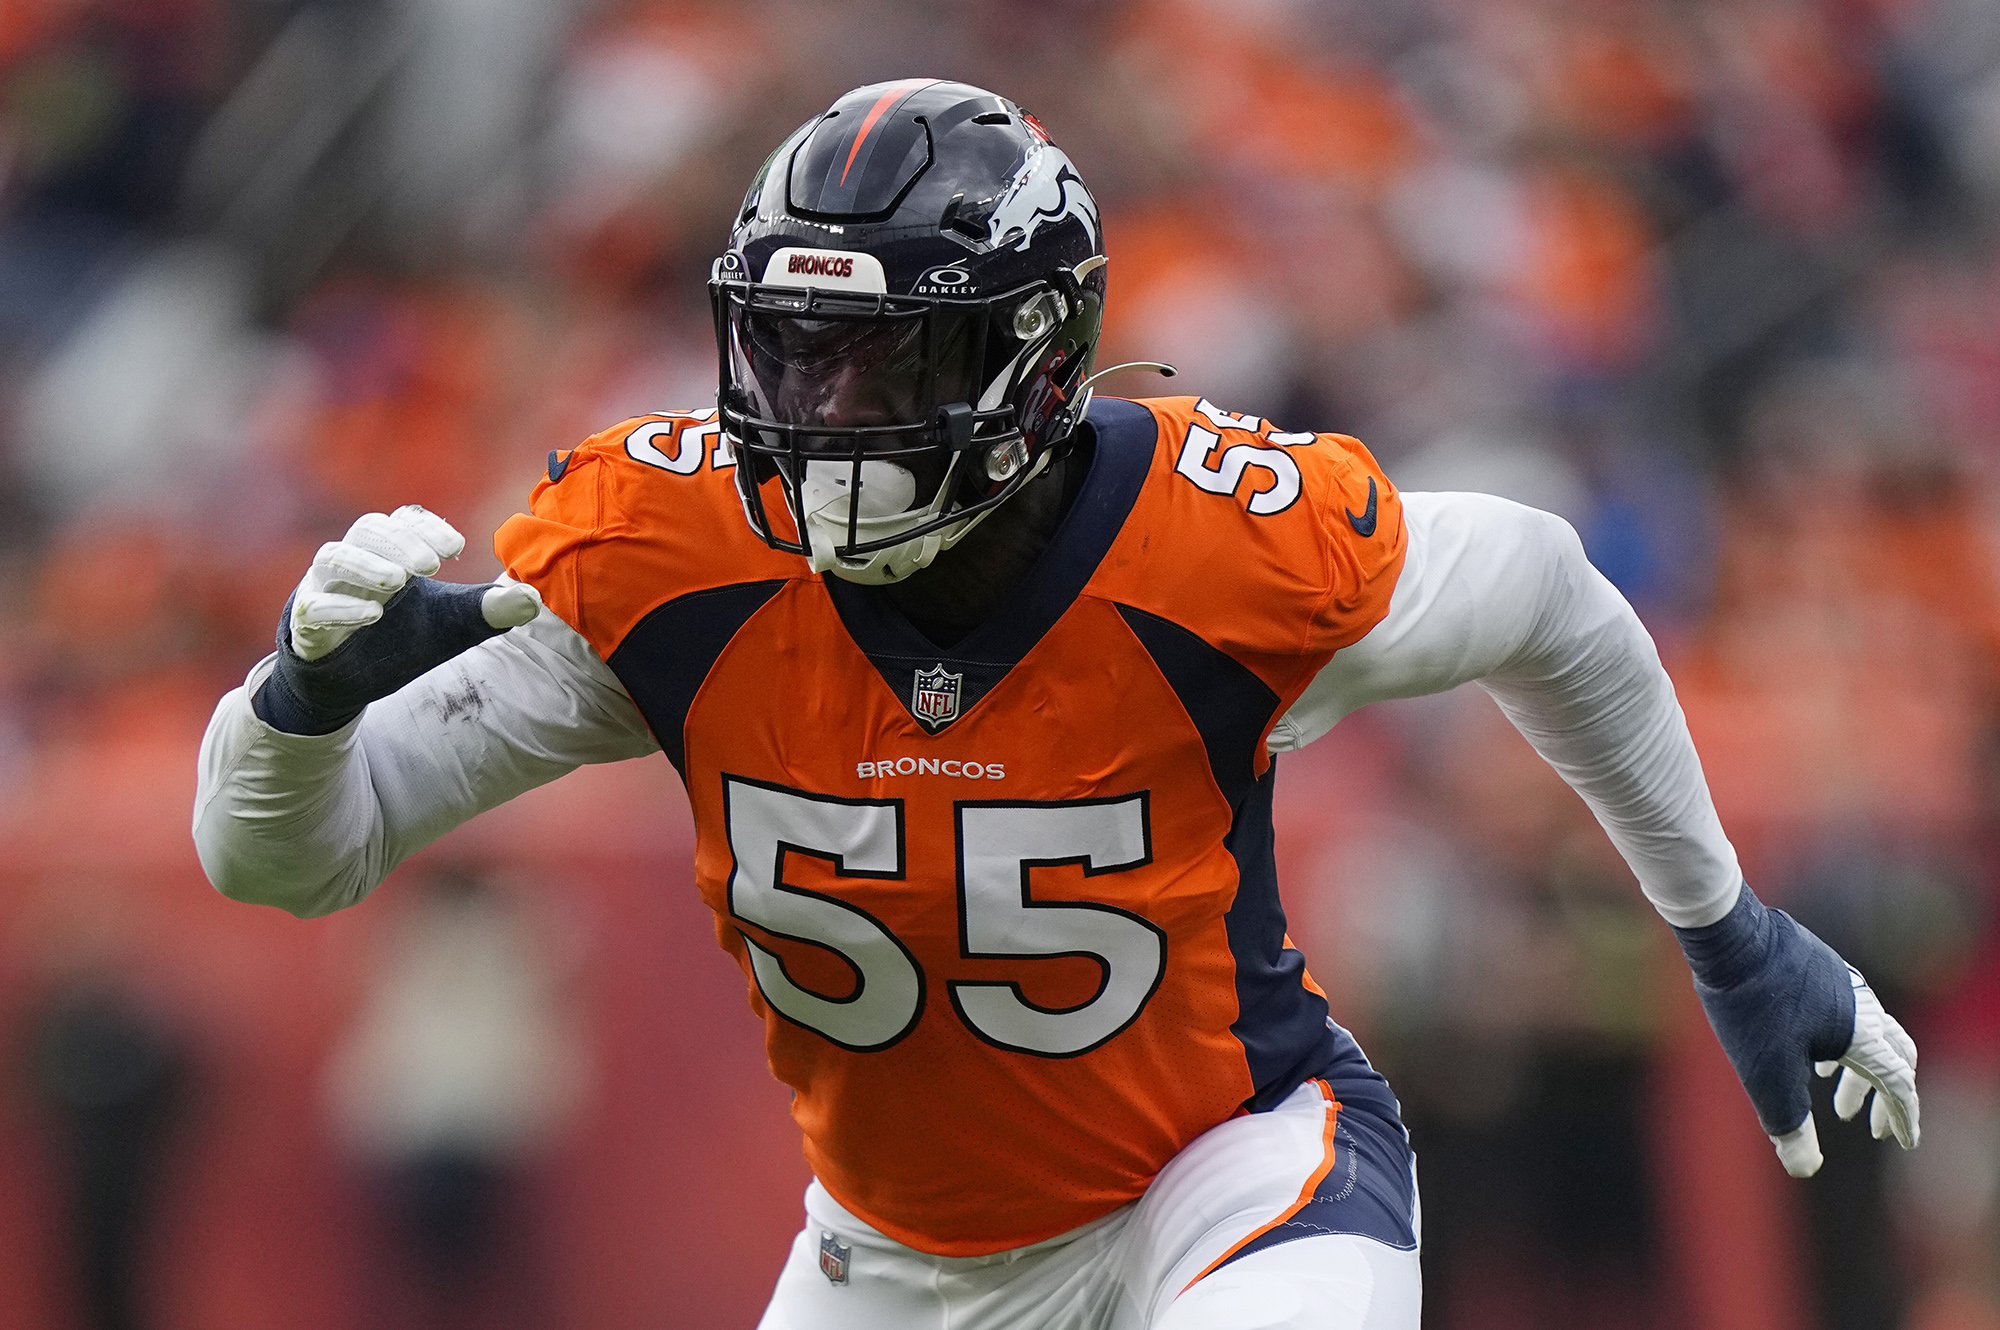 The Seattle Seahawks are reuniting with Frank Clark, bringing the veteran back to the team he started his NFL career with. Clark became a free agent after he was released by Denver earlier this month.